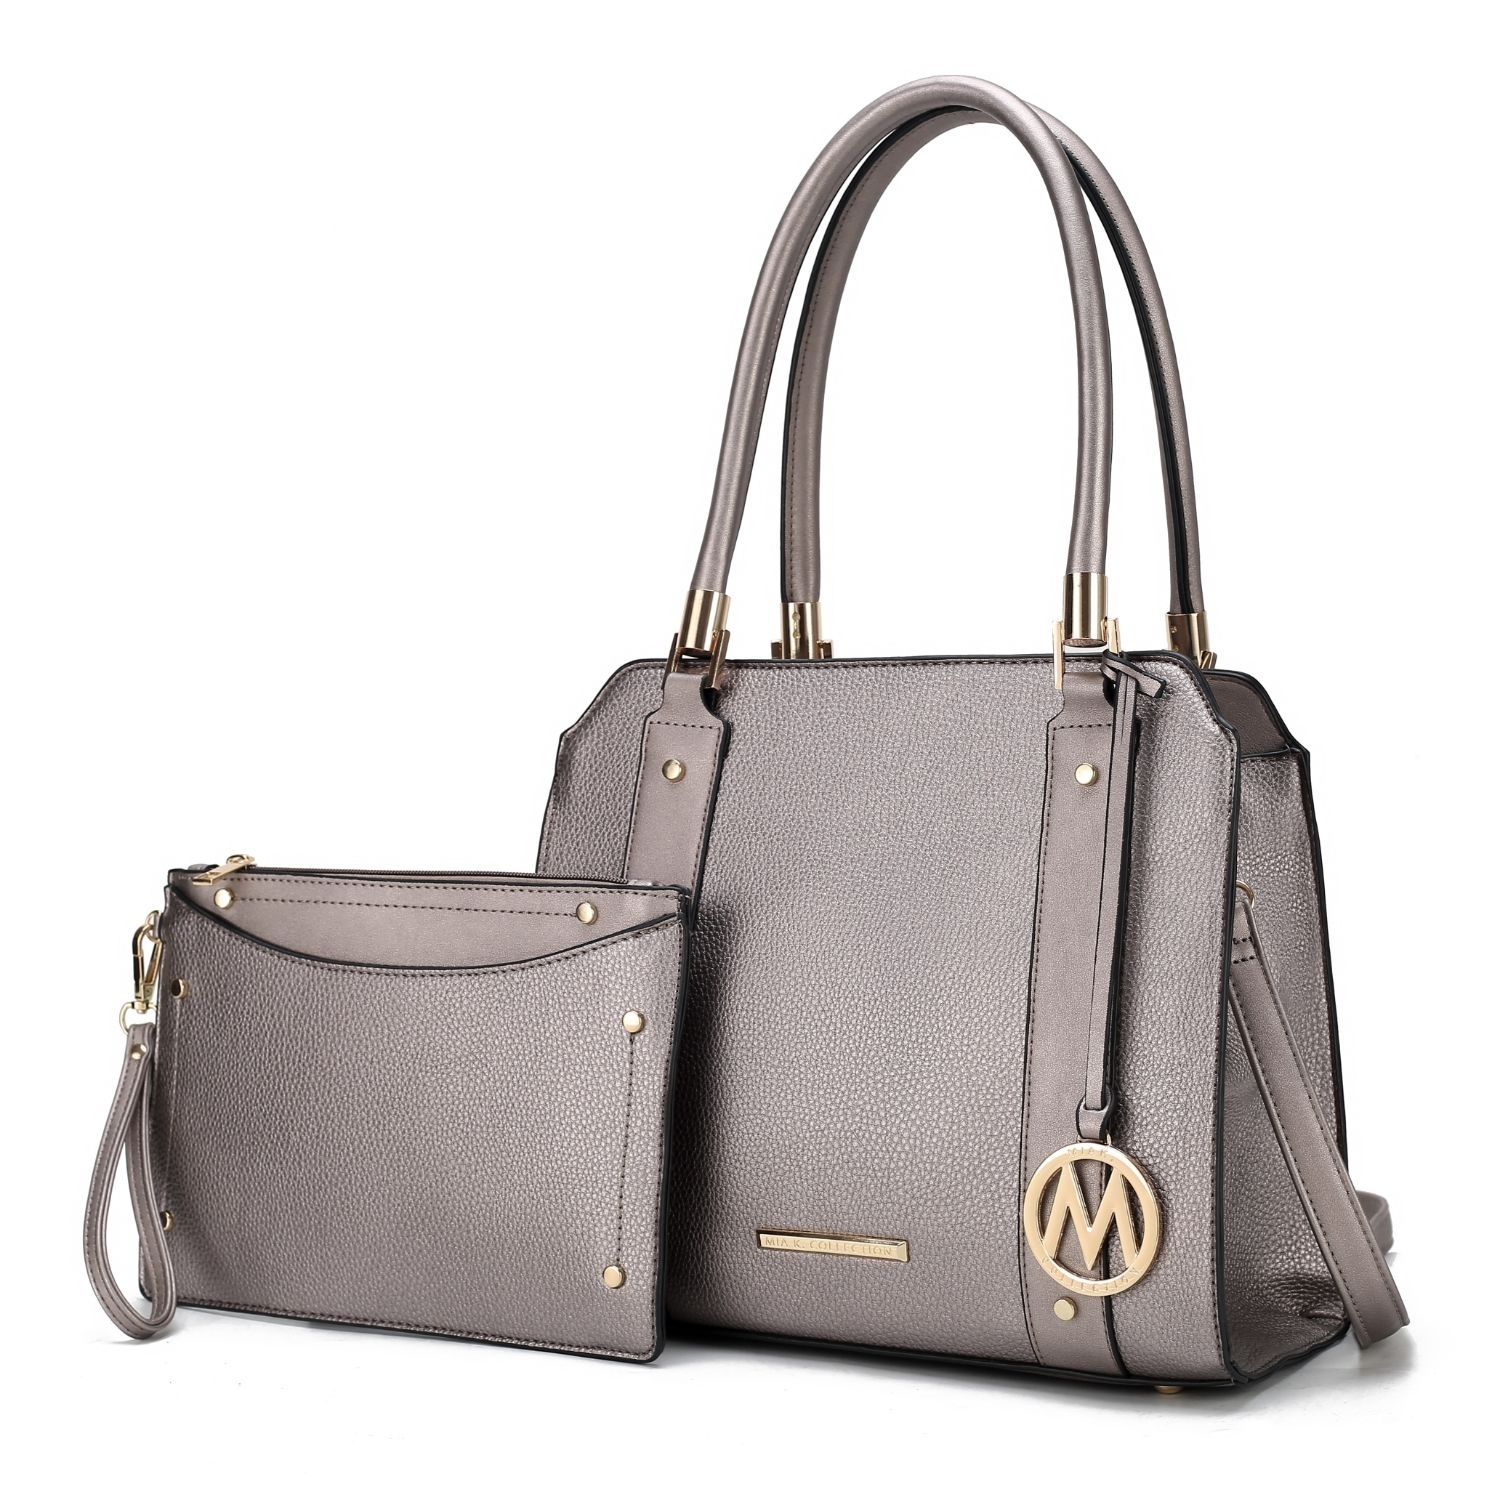 MKF Collection Norah Vegan Leather Women's Satchel Bag With Wristlet -2 Pieces By Mia K - Pewter